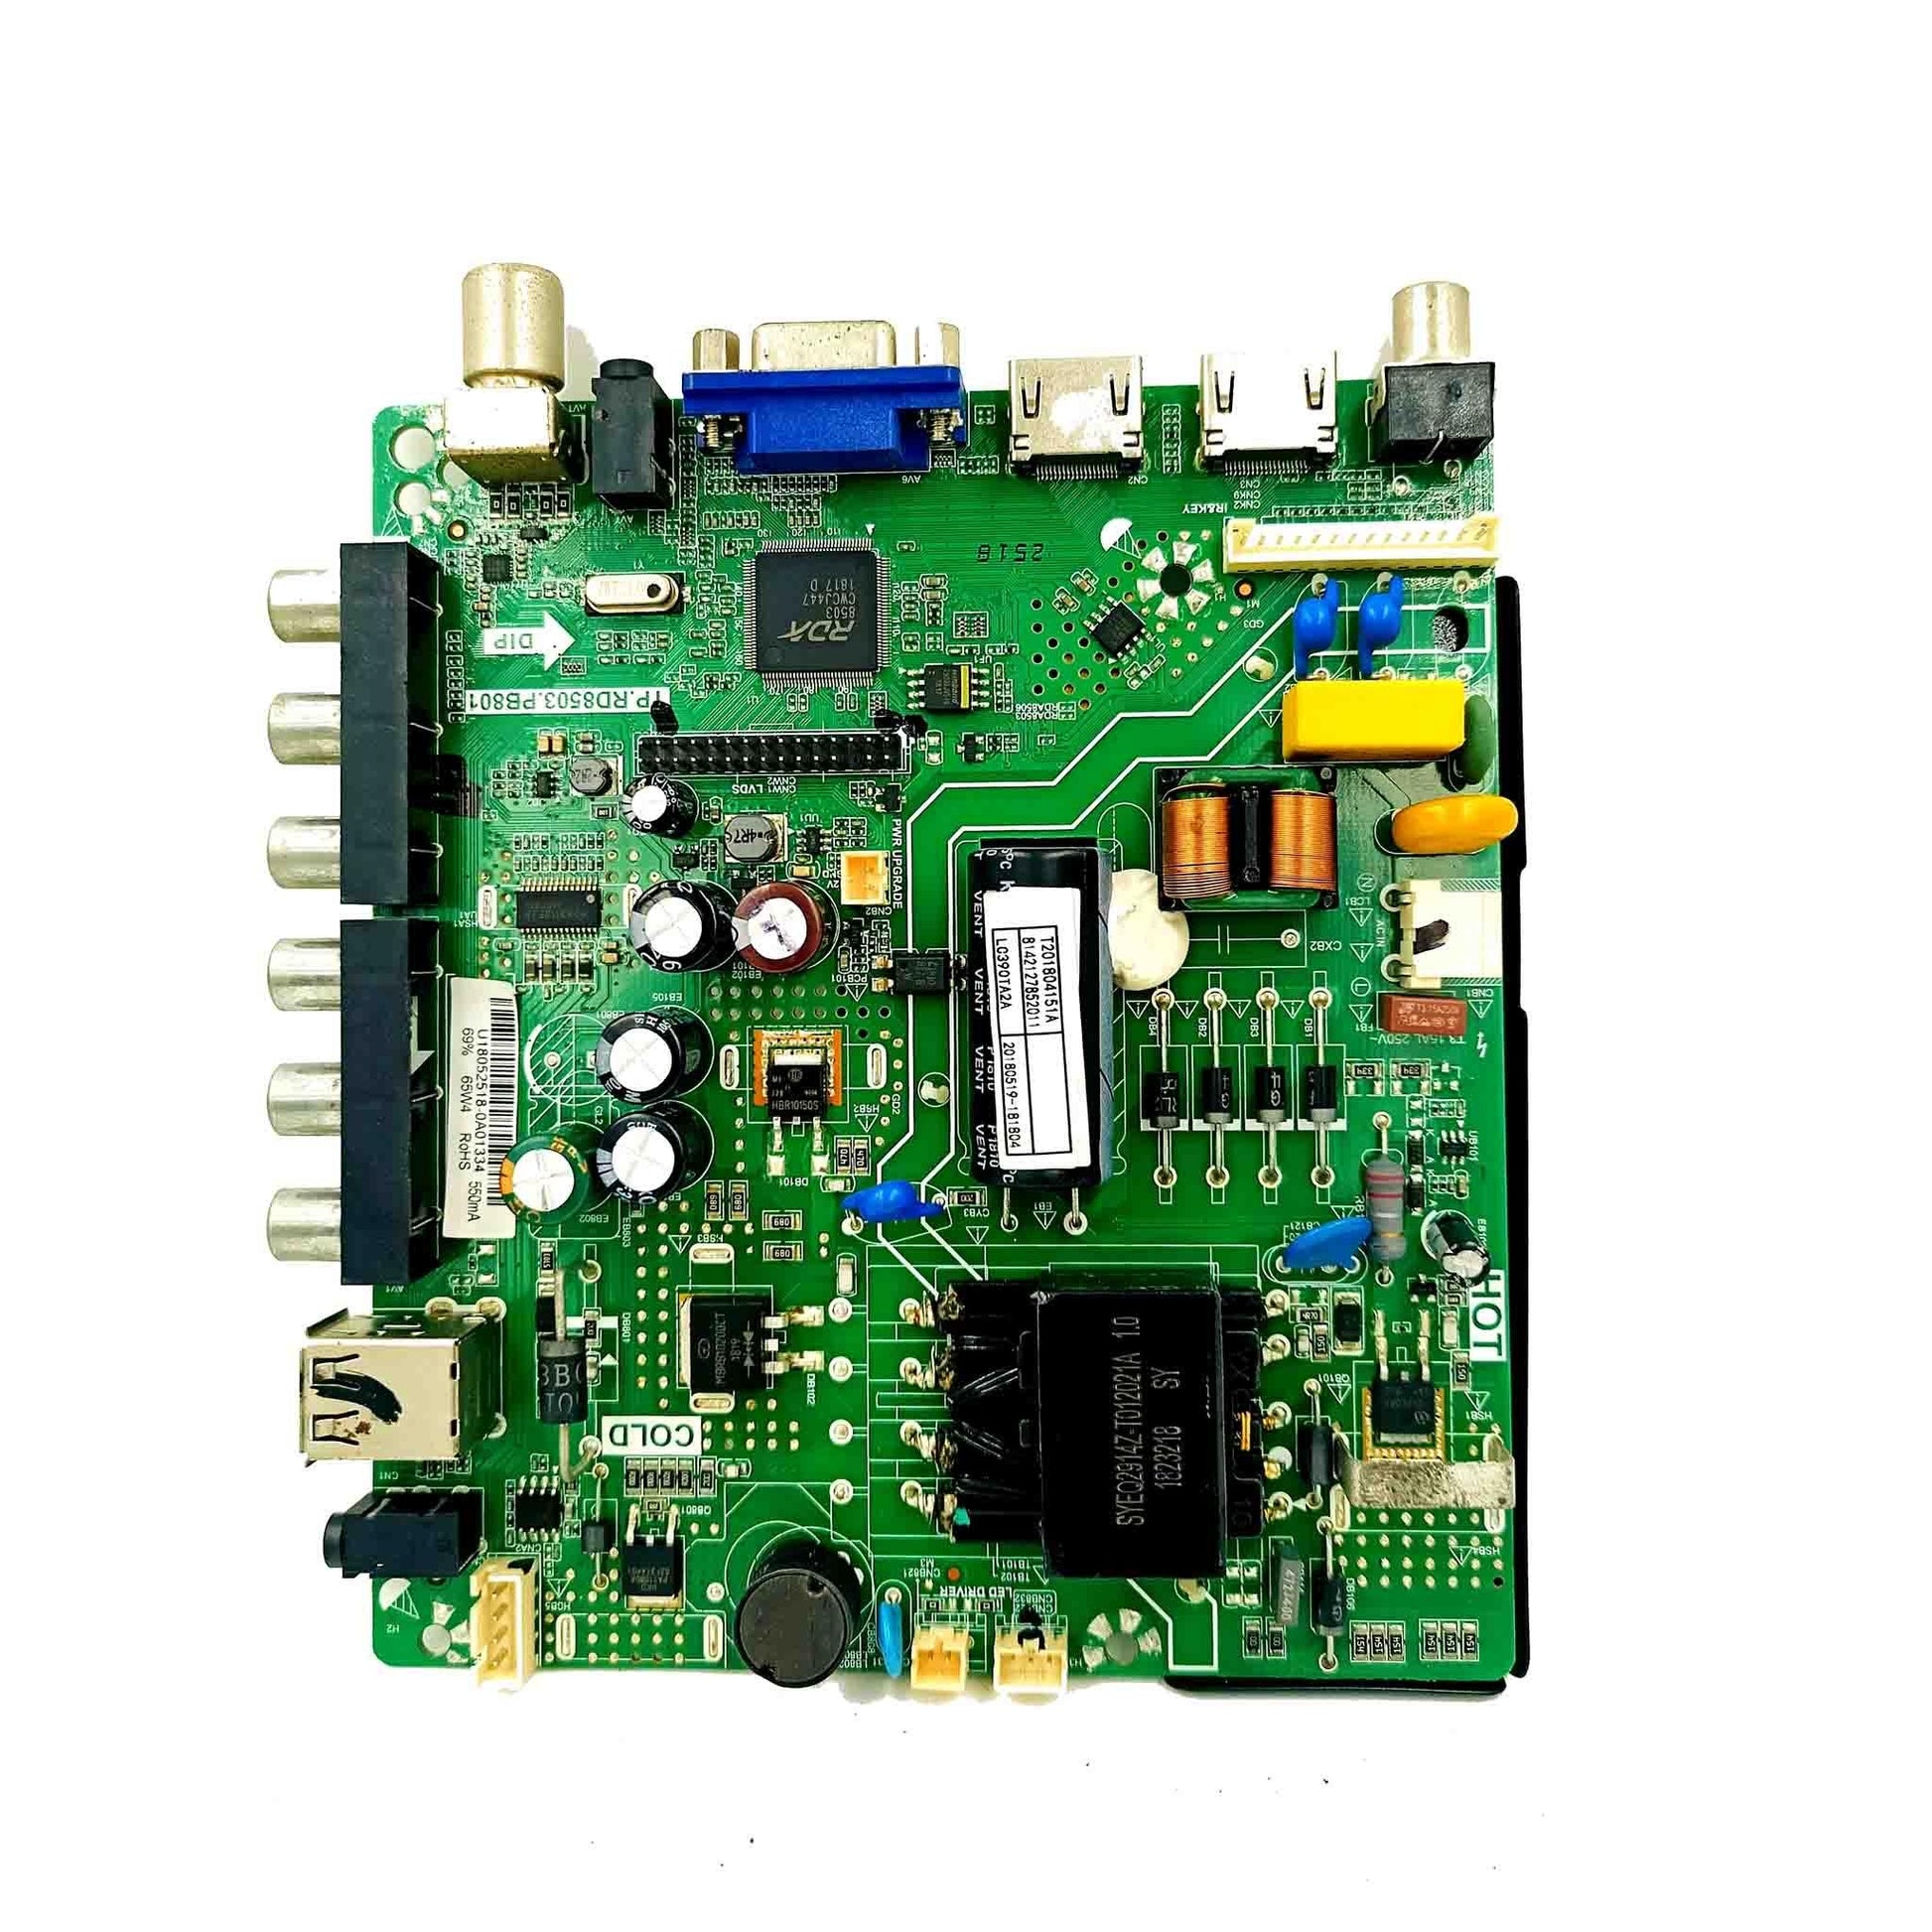 Mother board Suitable for KLE40DEFC4 Koryo LED TV - Faritha